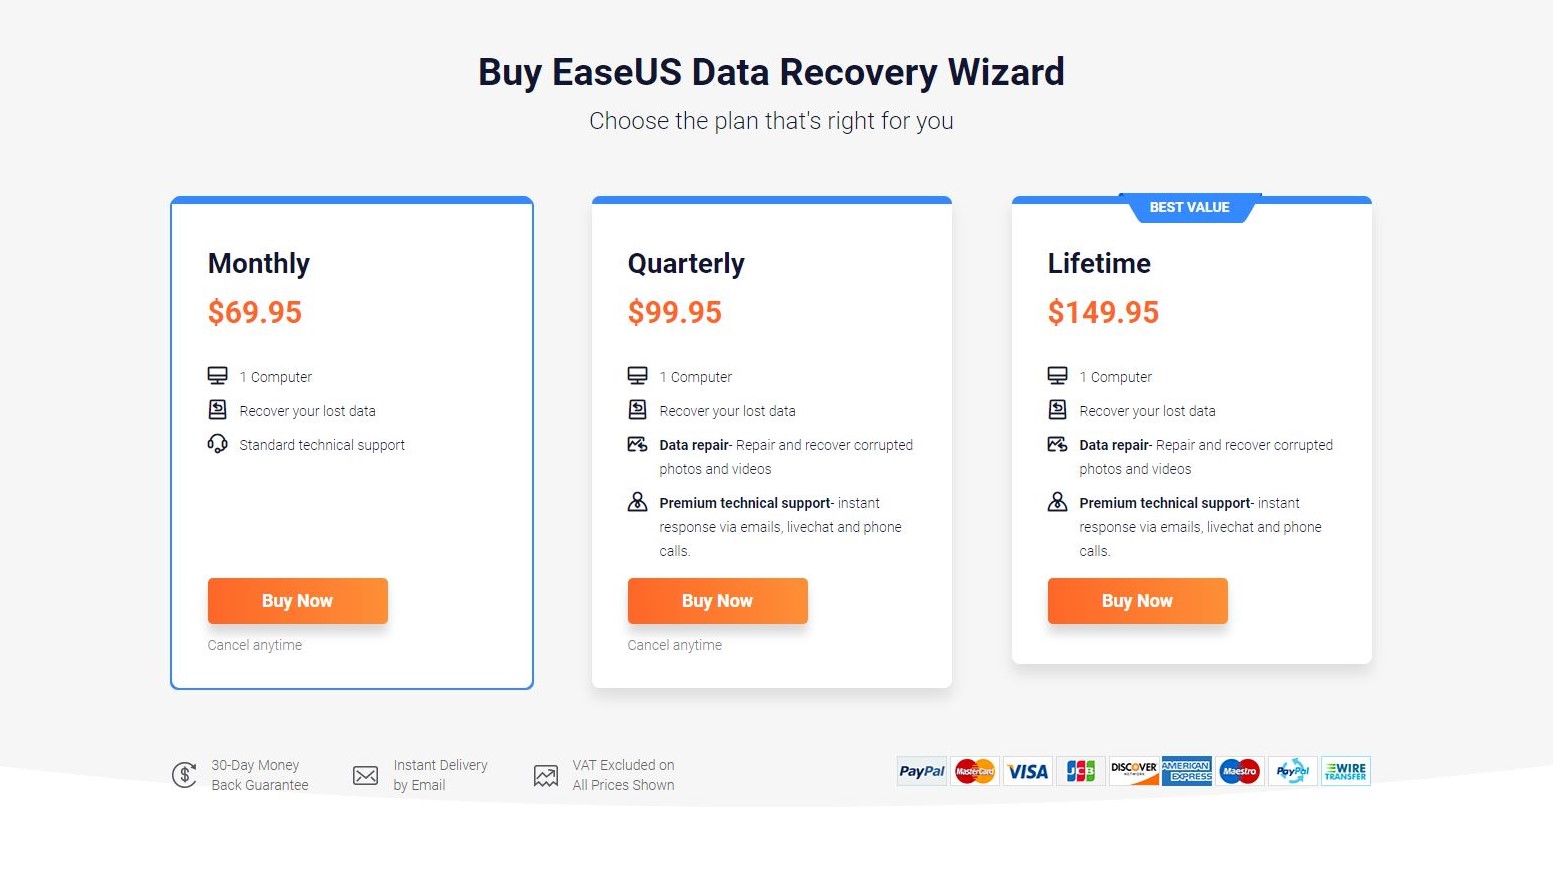 EaseUS Data Recovery Wizard ProPricing